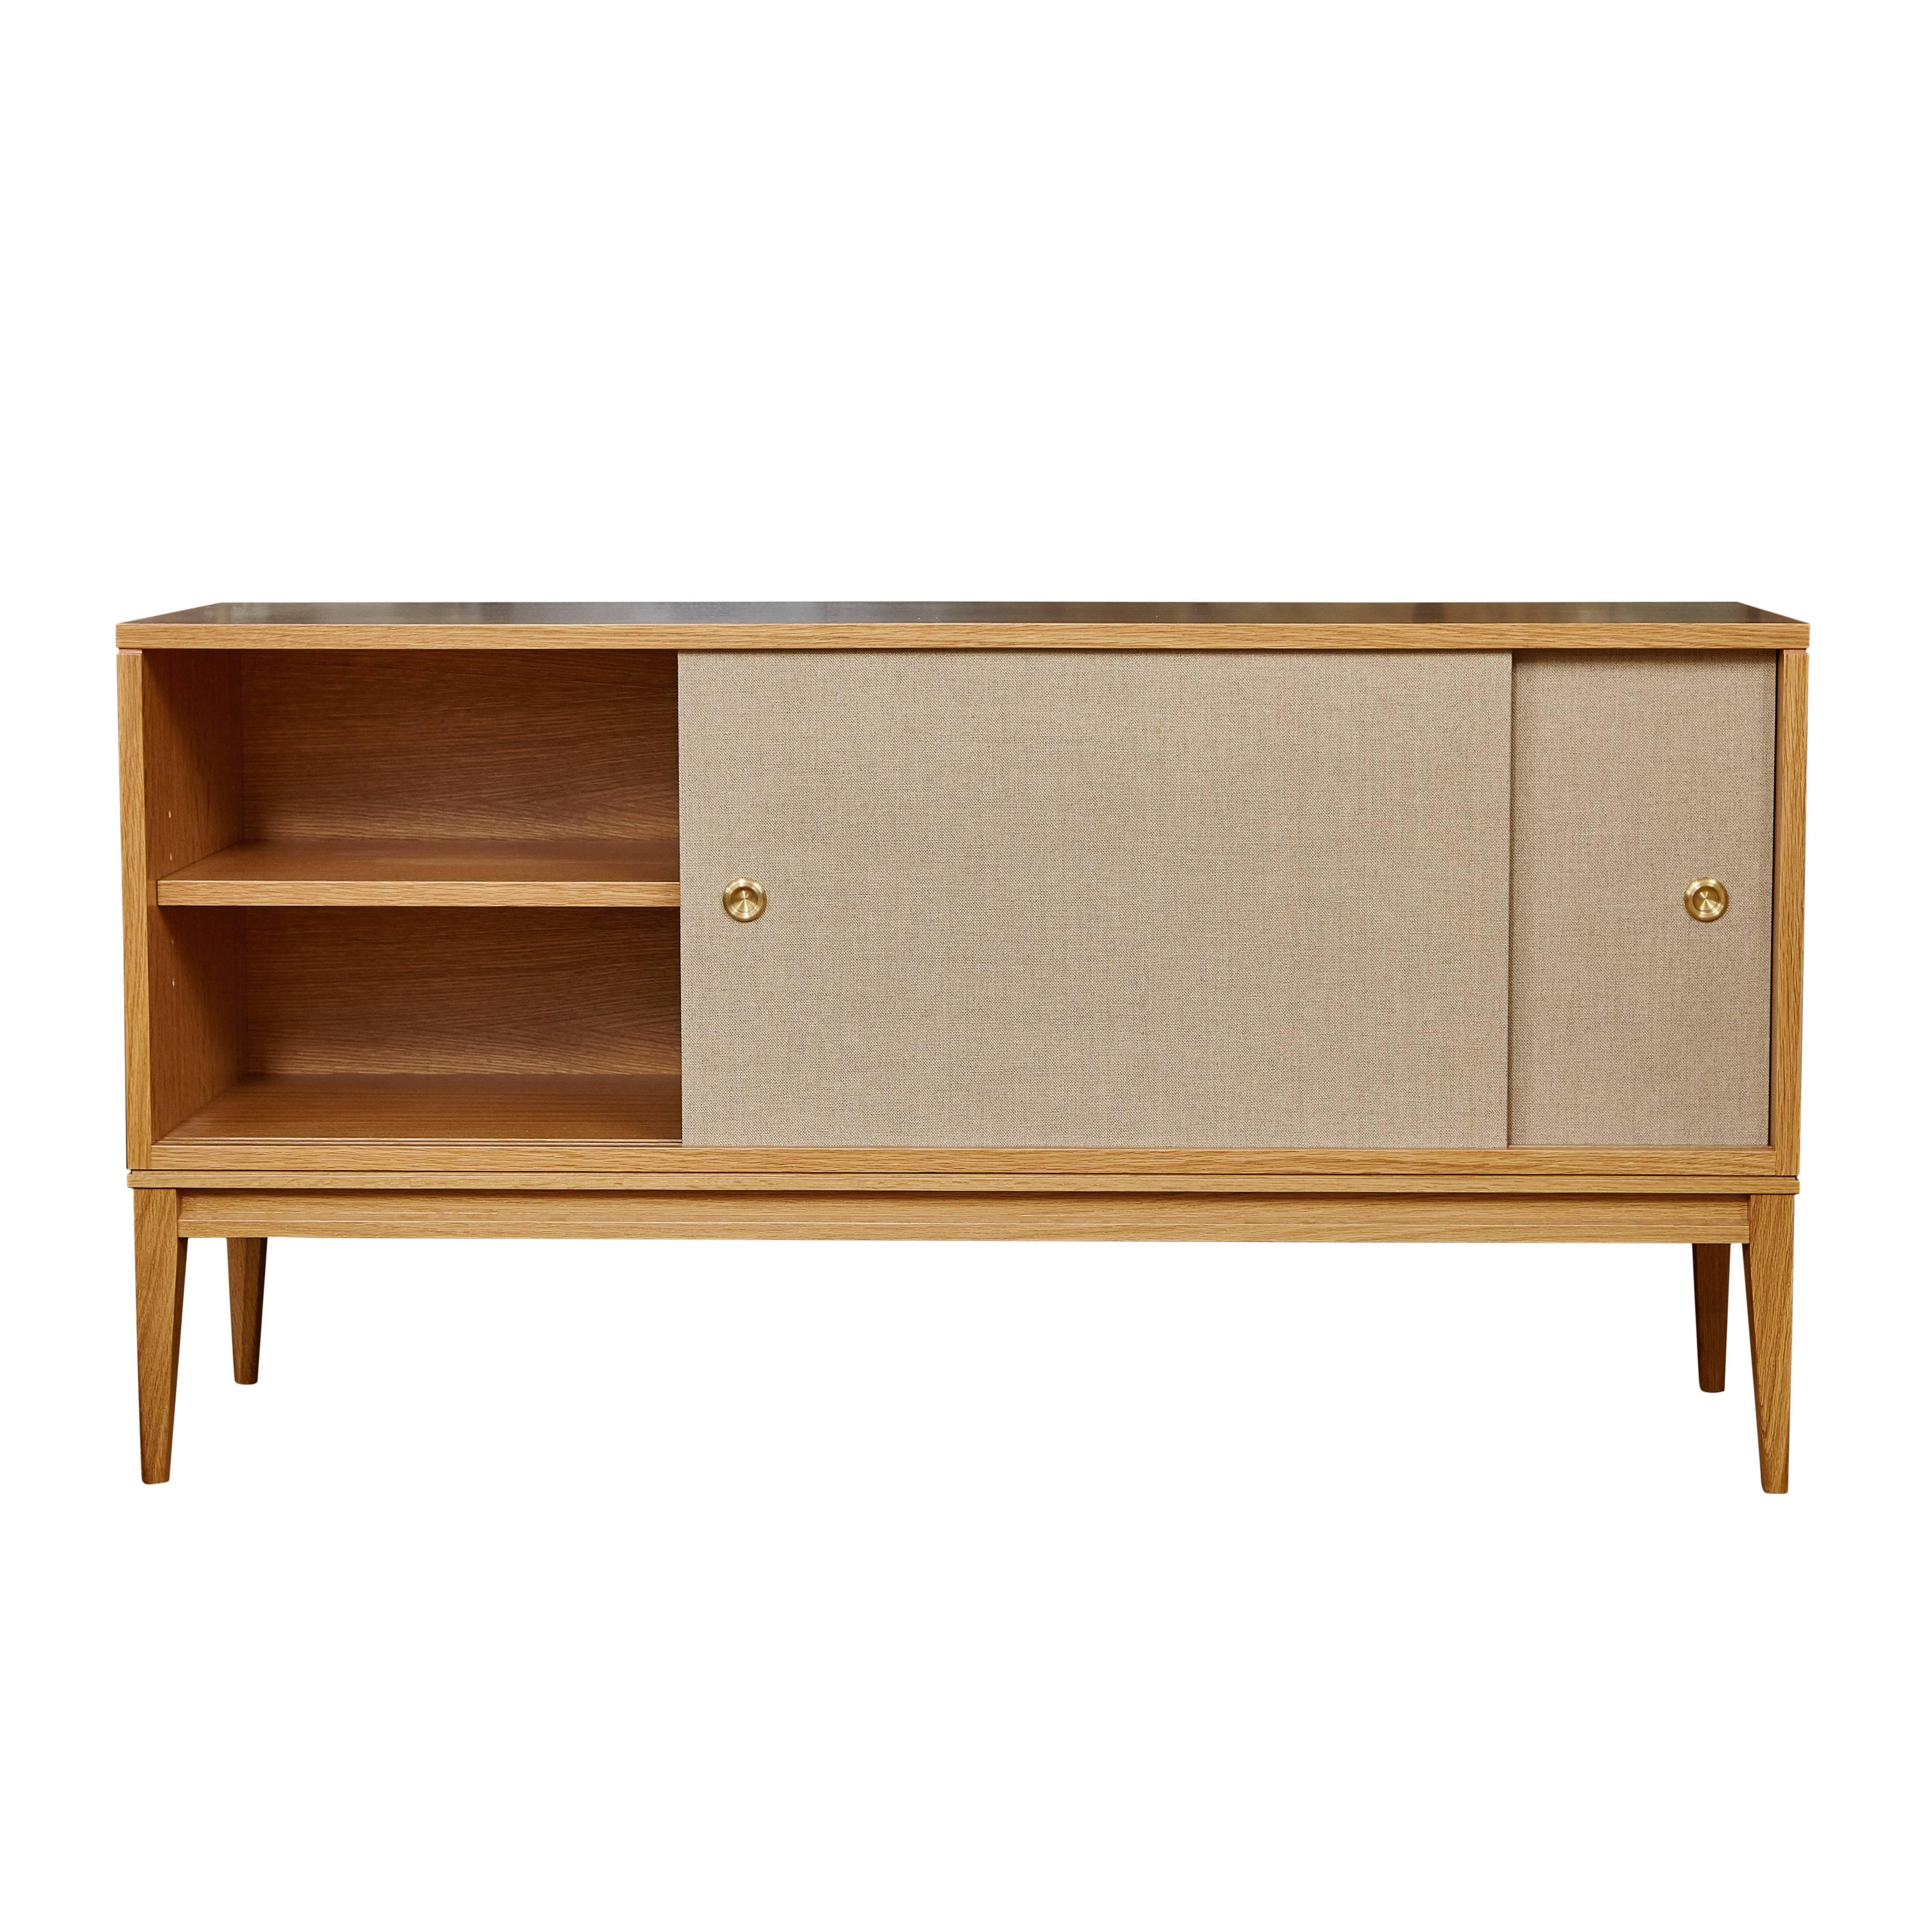 MN originals cerused oak console on solid tapered leg base with Belgium linen sliding doors detailed with solid brass finger pull hardware. Interior has adjustable shelving and cerused finish to match exterior. Please contact us about custom sizes